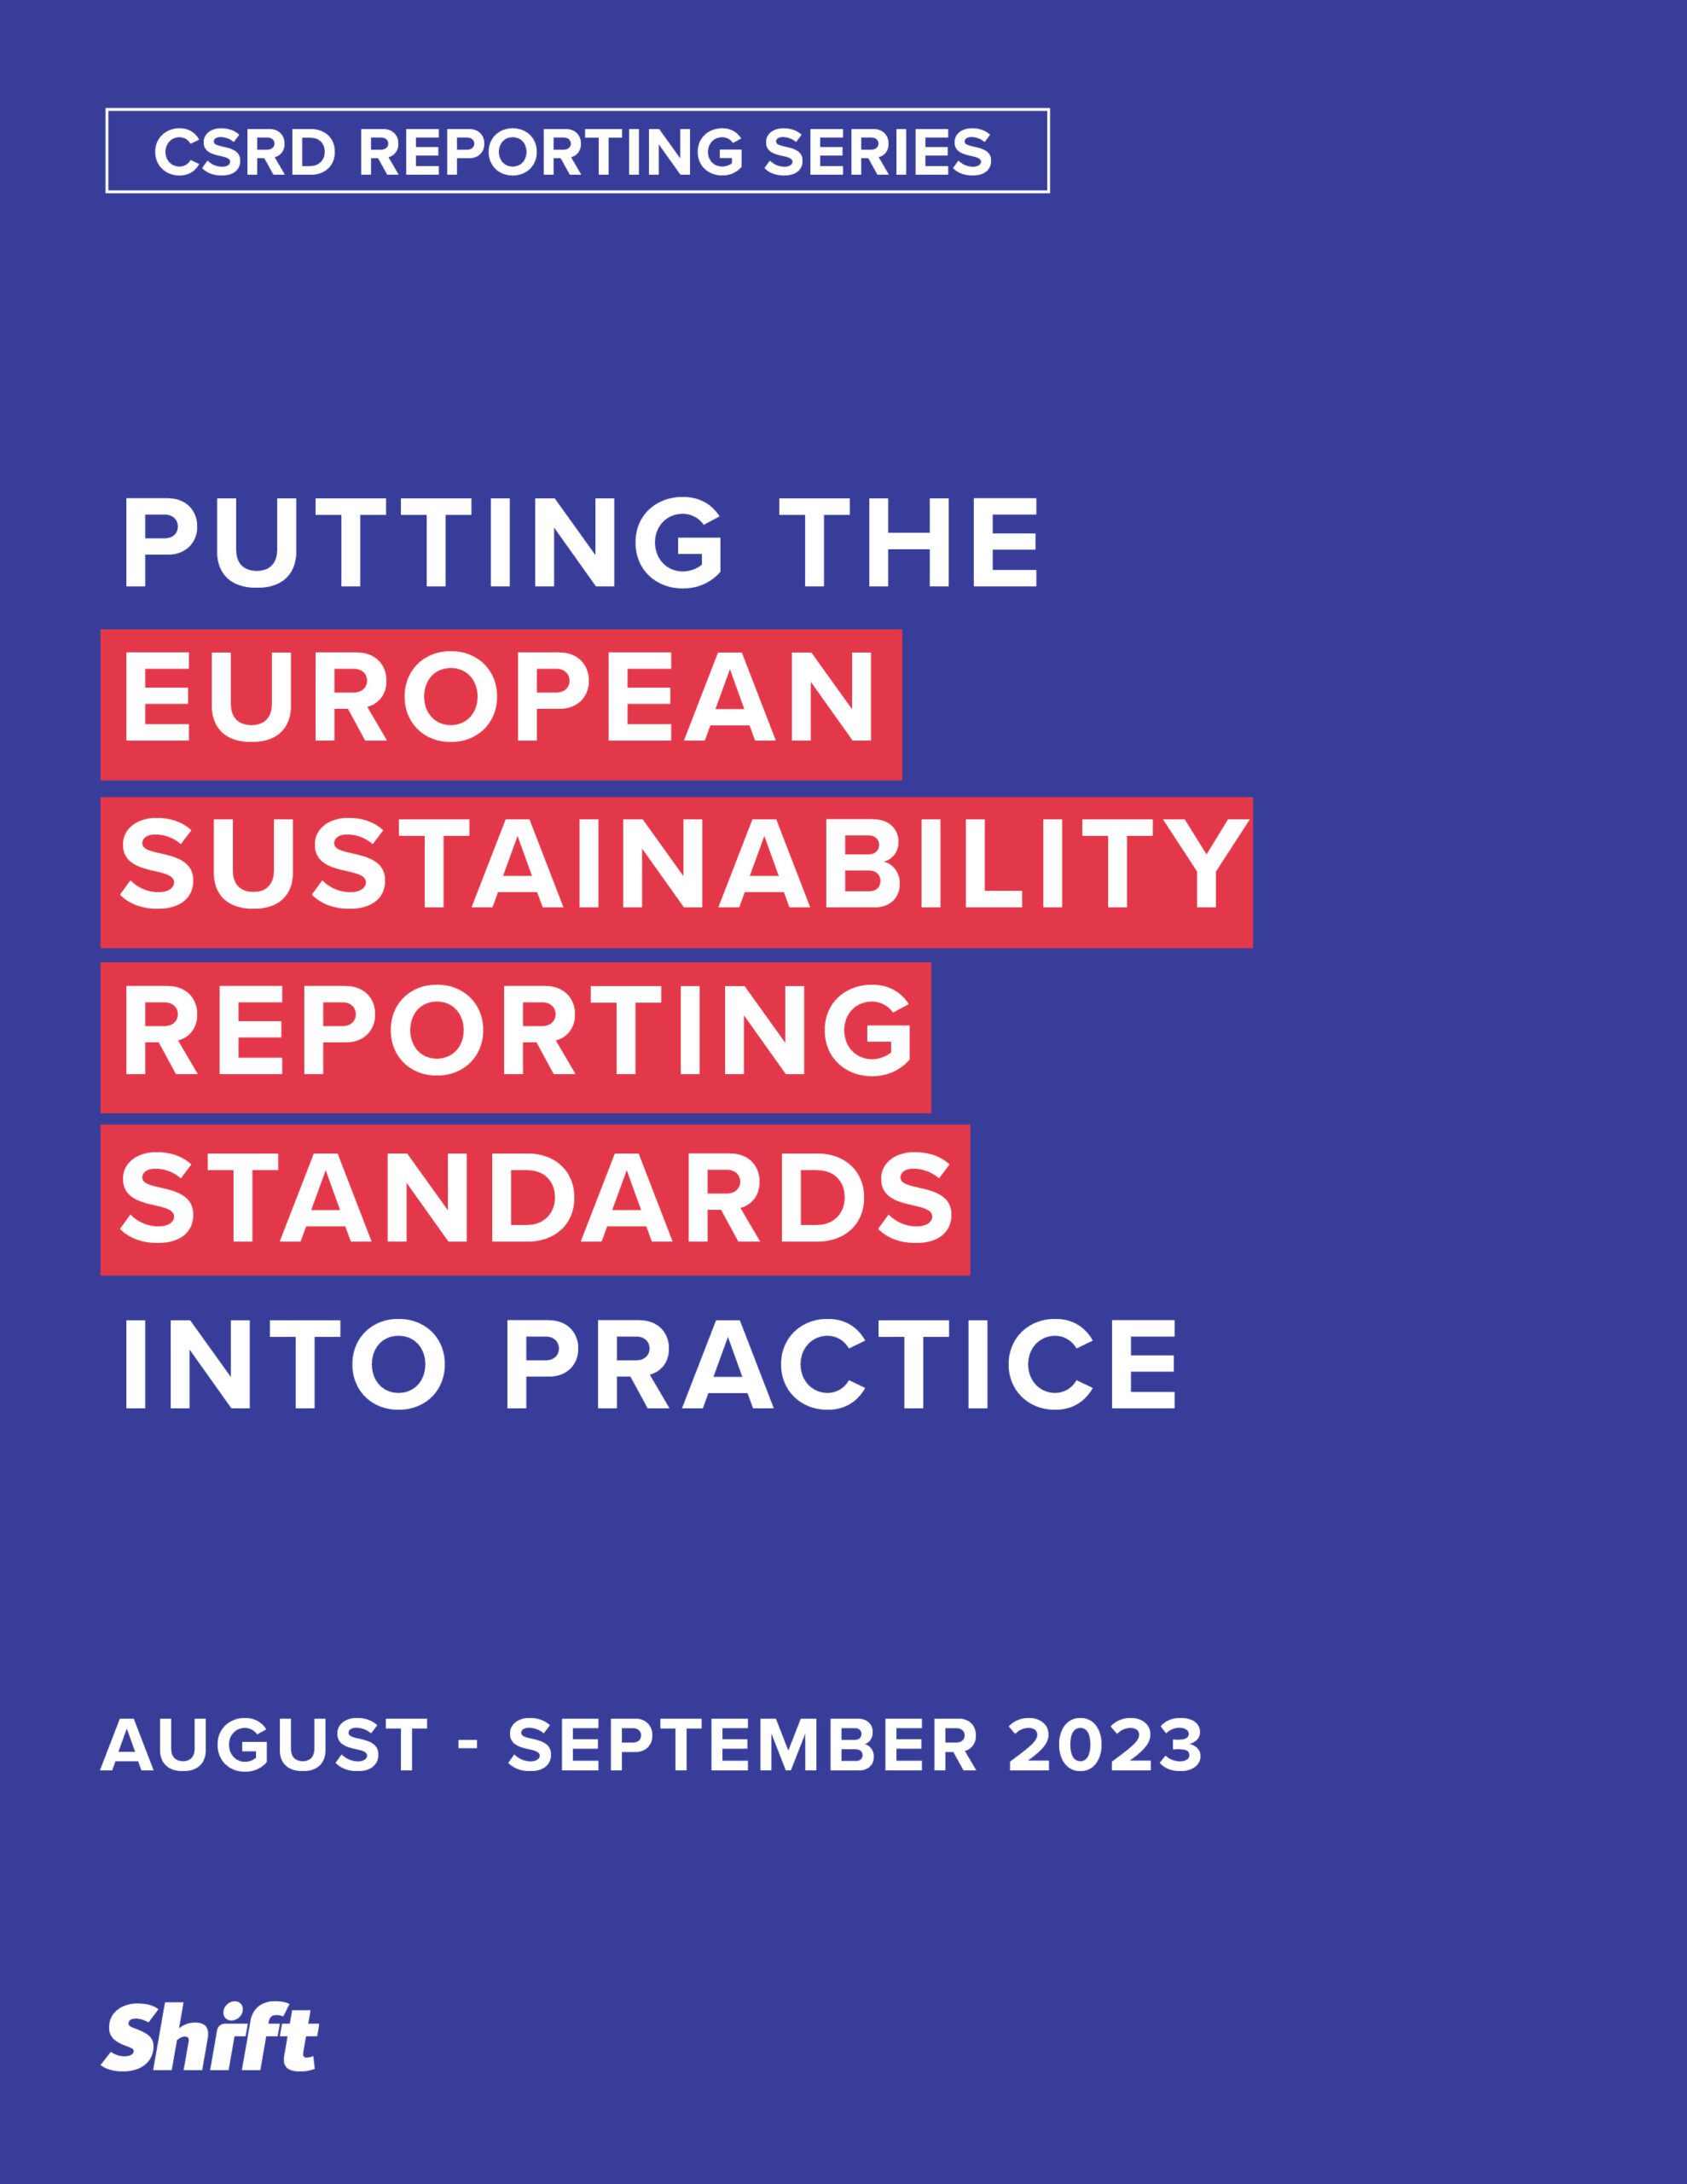 Putting the European Sustainability Reporting Standards into Practice